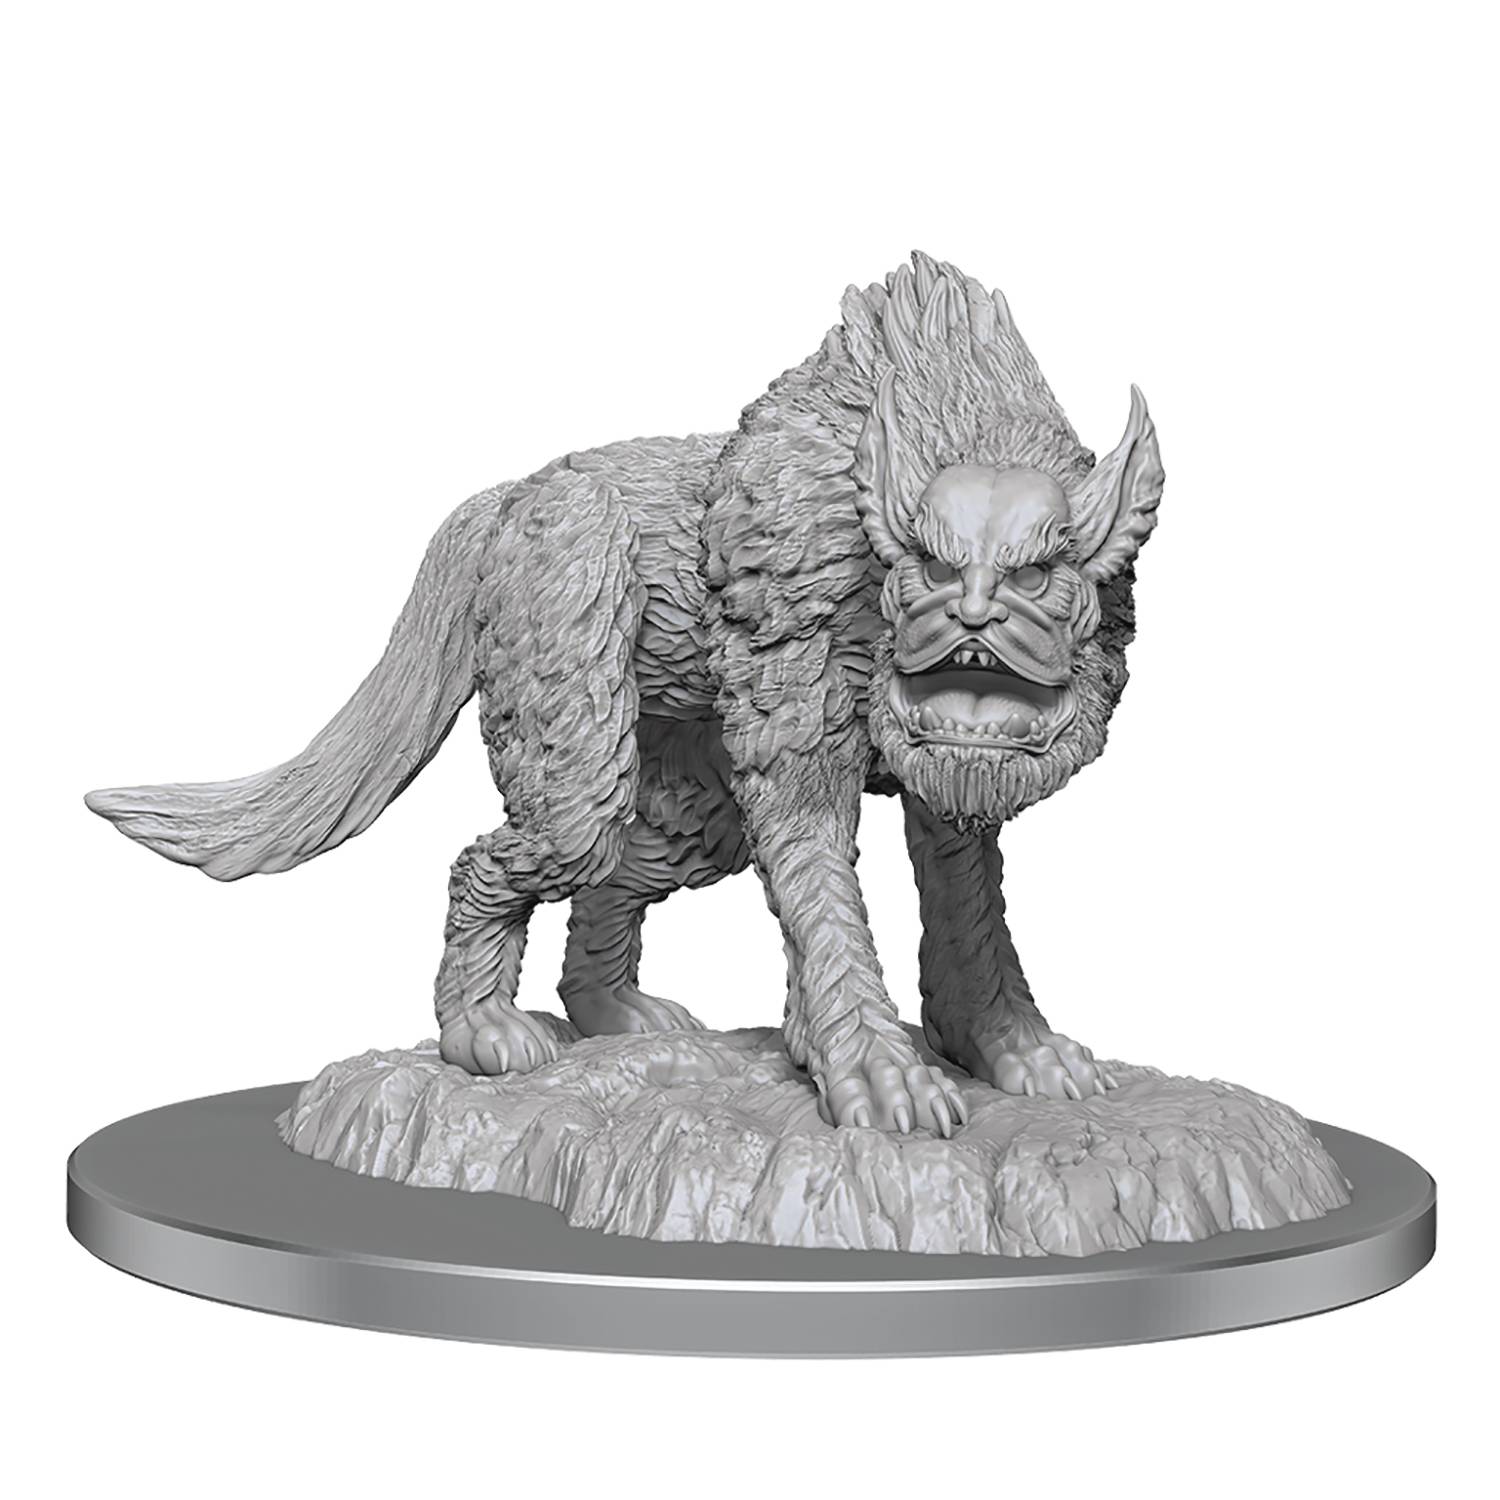 Dungeons & Dragons Nolzurs Marvelous Minis Paint Kit Yeth Hound